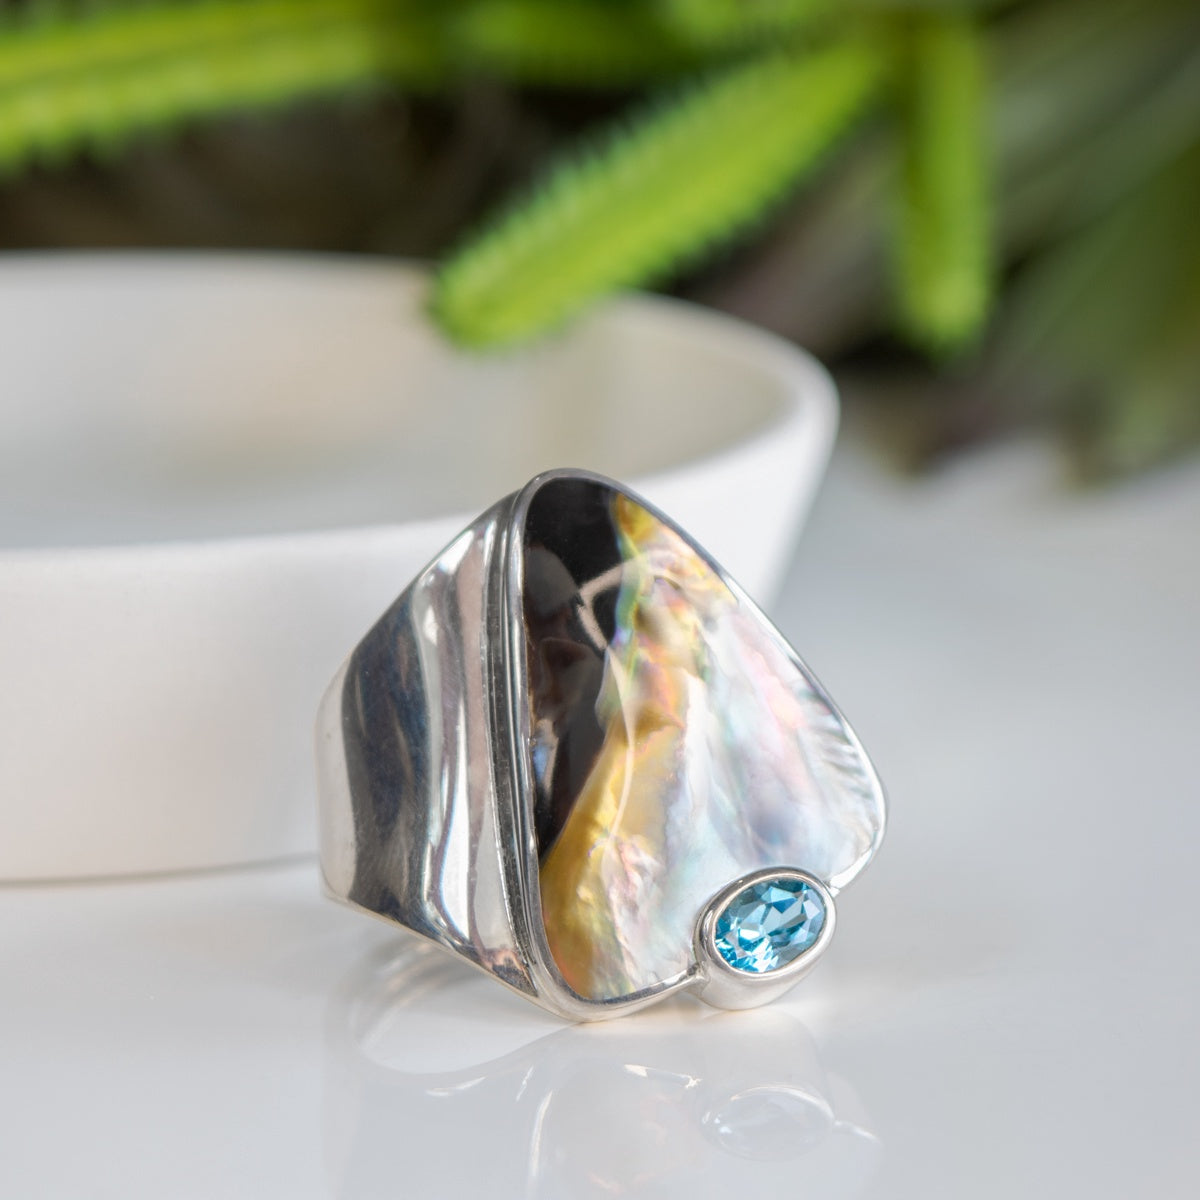 Marta Howell Black Lipped Oyster & Oval Blue Topaz Adjustable Ring